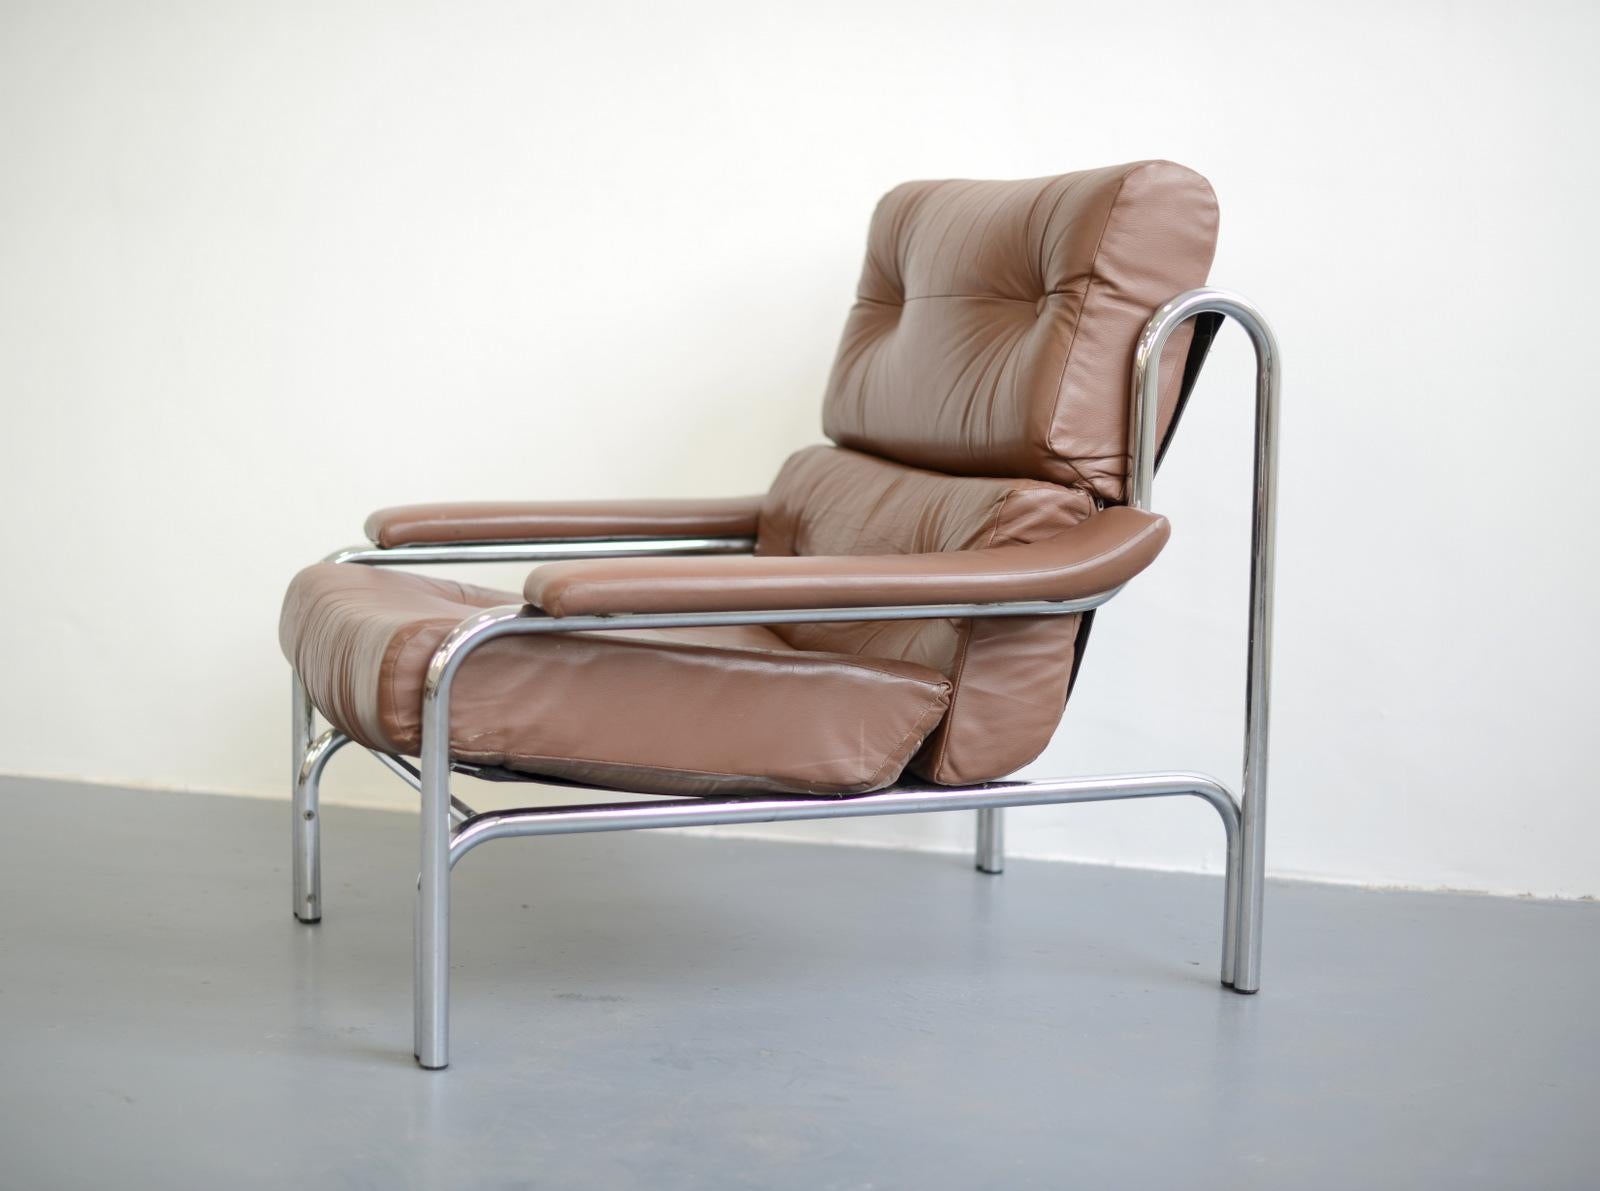 Tim Bates for Pieff lounge chair, circa 1970s.

- Chromed tubular steel frame
- Quality button back leather seat and back rest
- Sprung rubber diaphragm made by Pirrelli
- Designed by Tim Bates
- Made by Pieff
- English ~ 1970s
- 88cm wide x